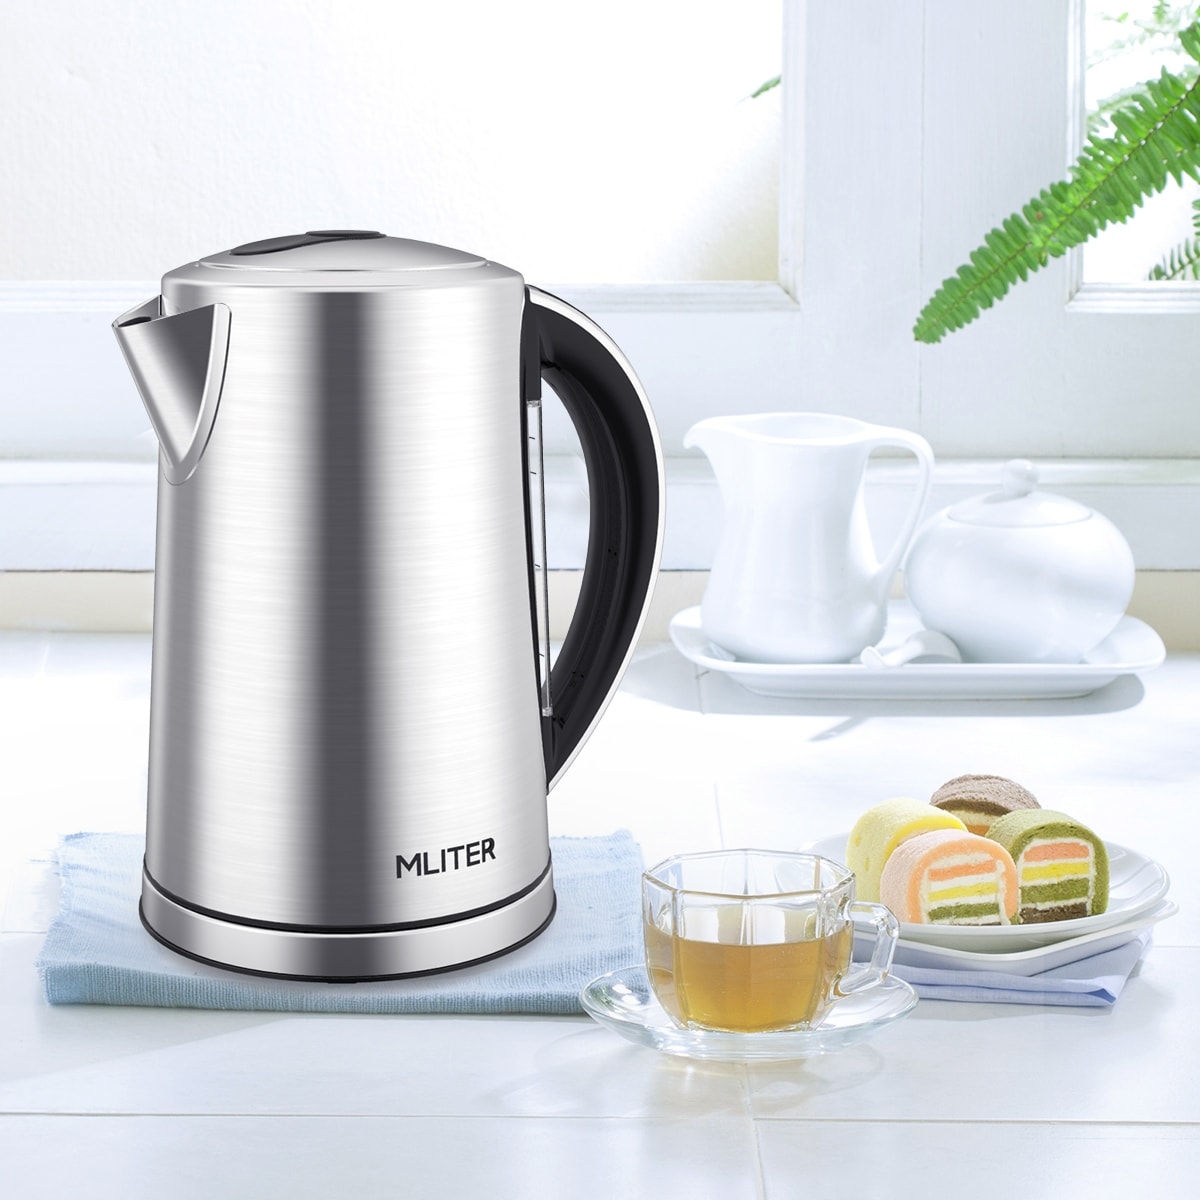 https://ak1.ostkcdn.com/images/products/is/images/direct/b7c5a7a2aa278abe9b3ad9d1f00e9db8b020ec31/Mliter-Electric-Kettle-With-LED-light%2C-1500W-1.7Litre%2C-Stainless-Steel%2C-Boil-Dry-Protection.jpg